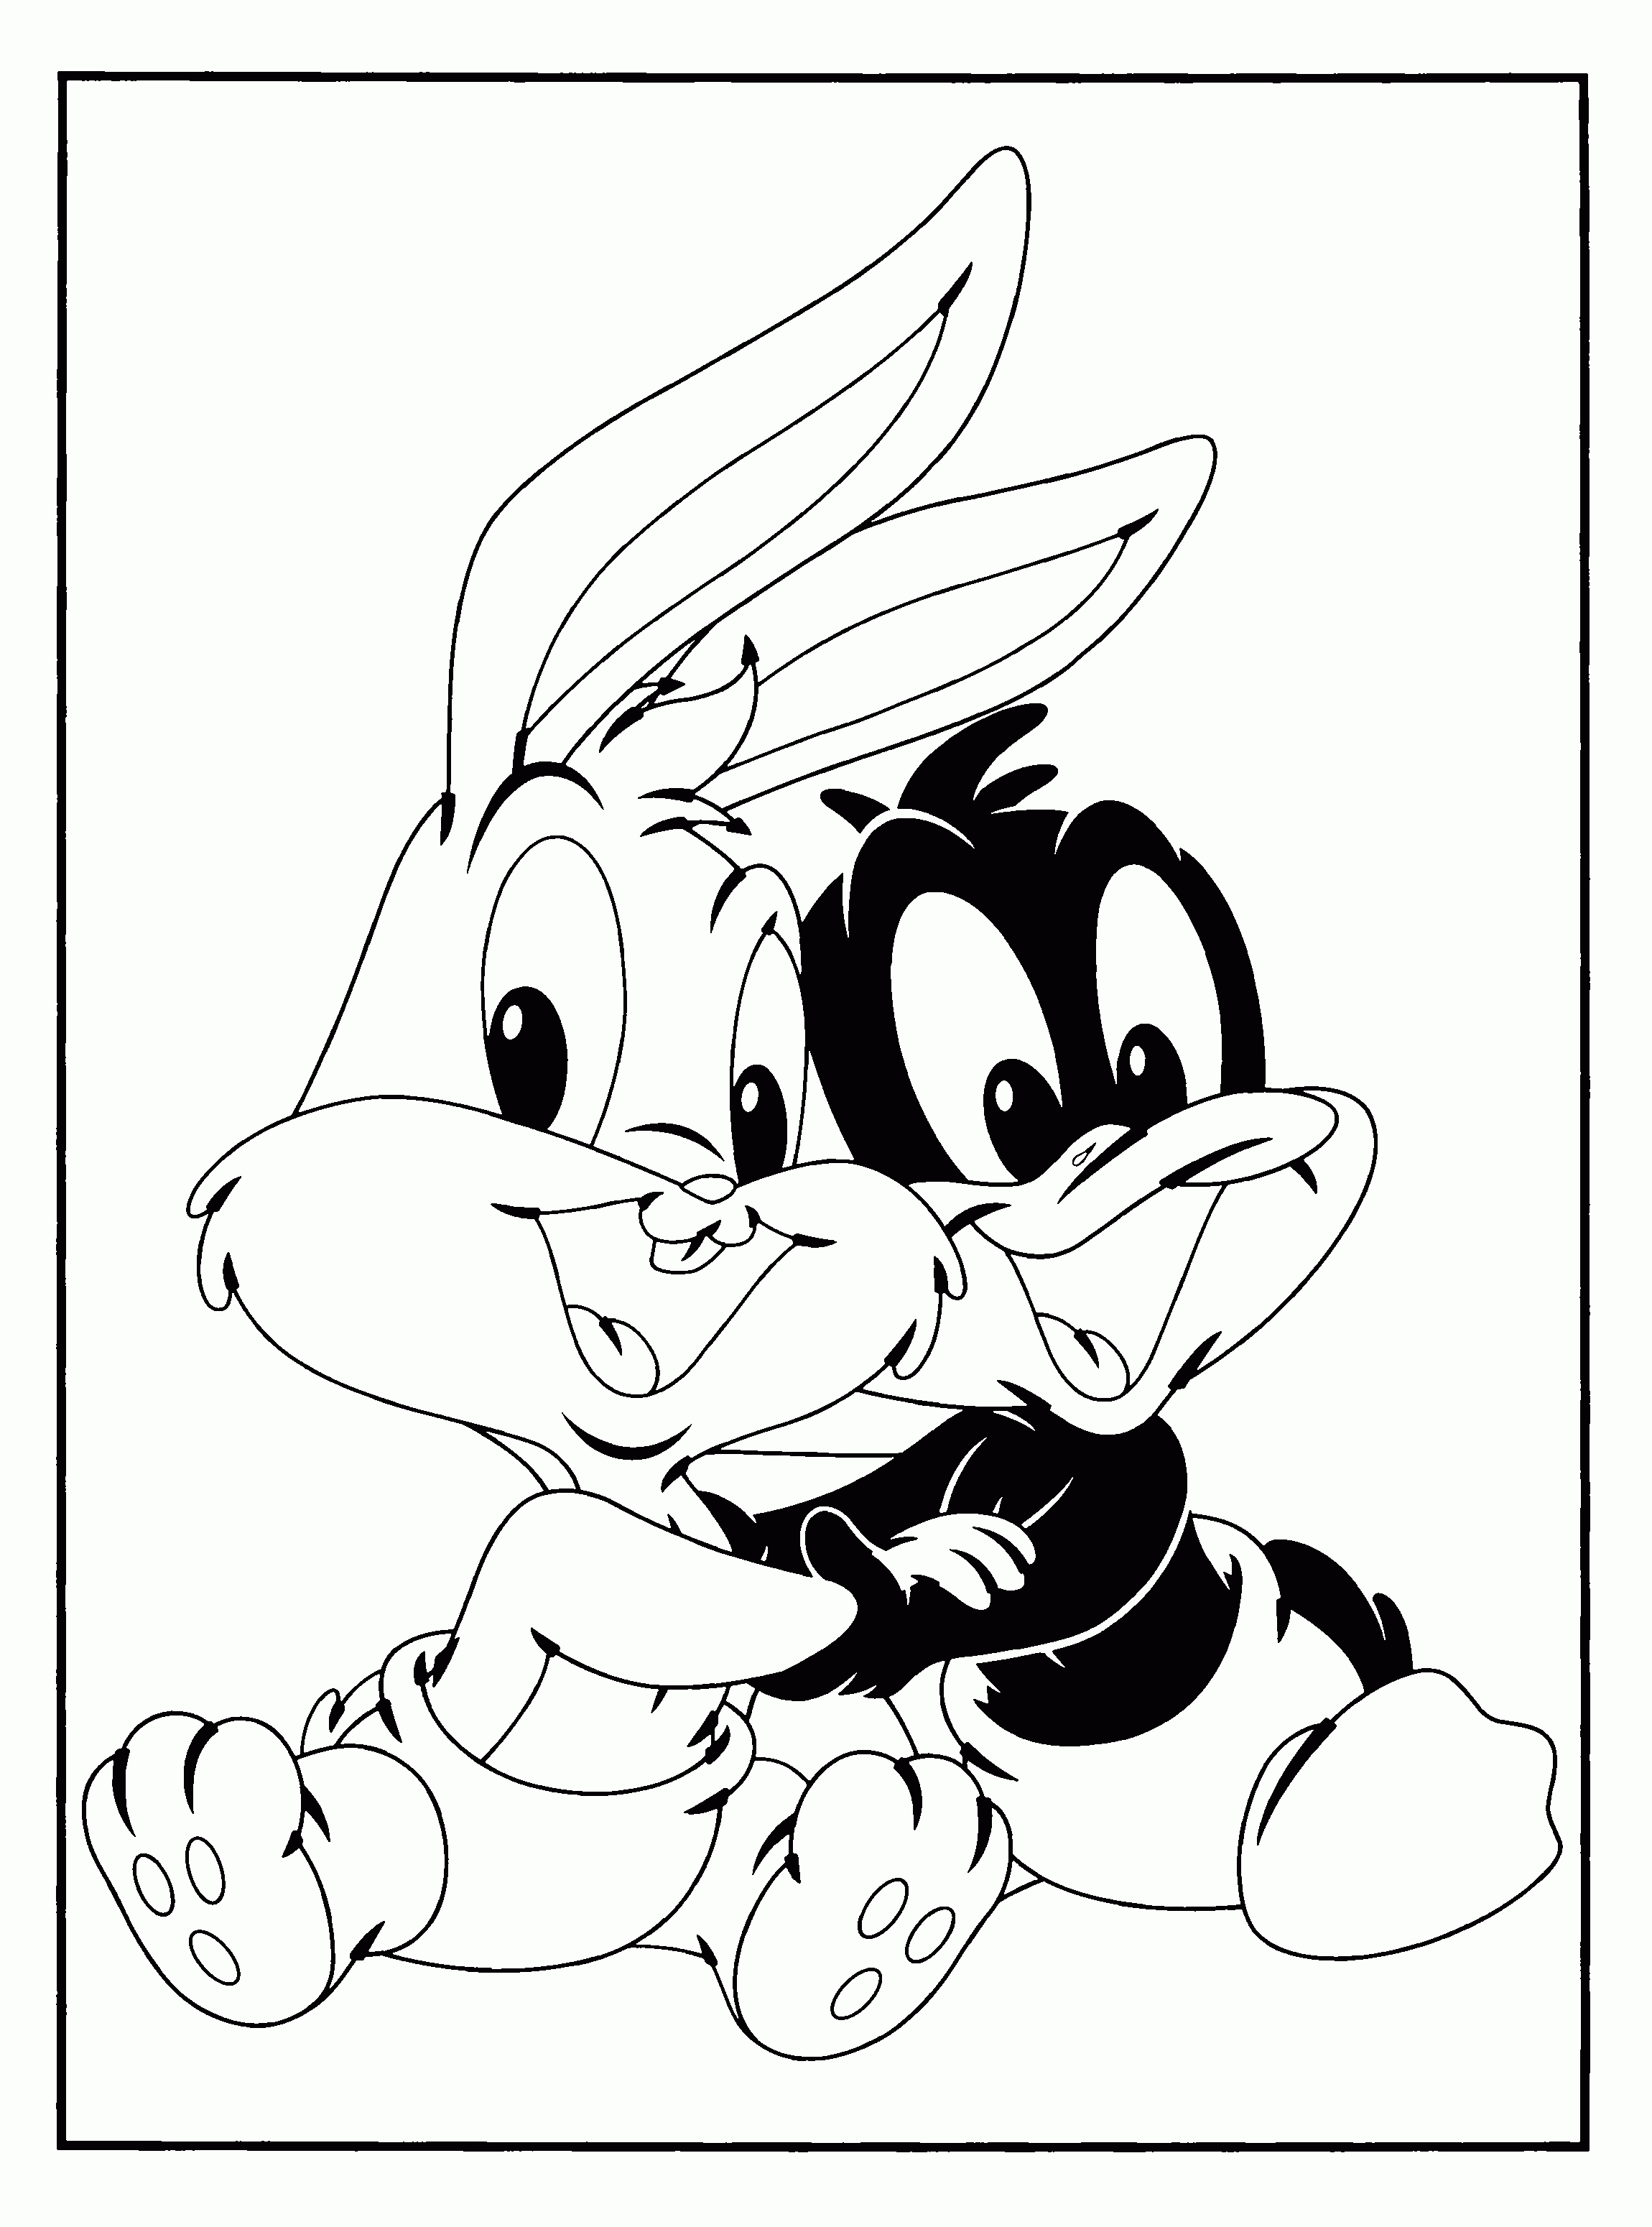 Printable Looney Tunes Coloring Pages | Coloring Me